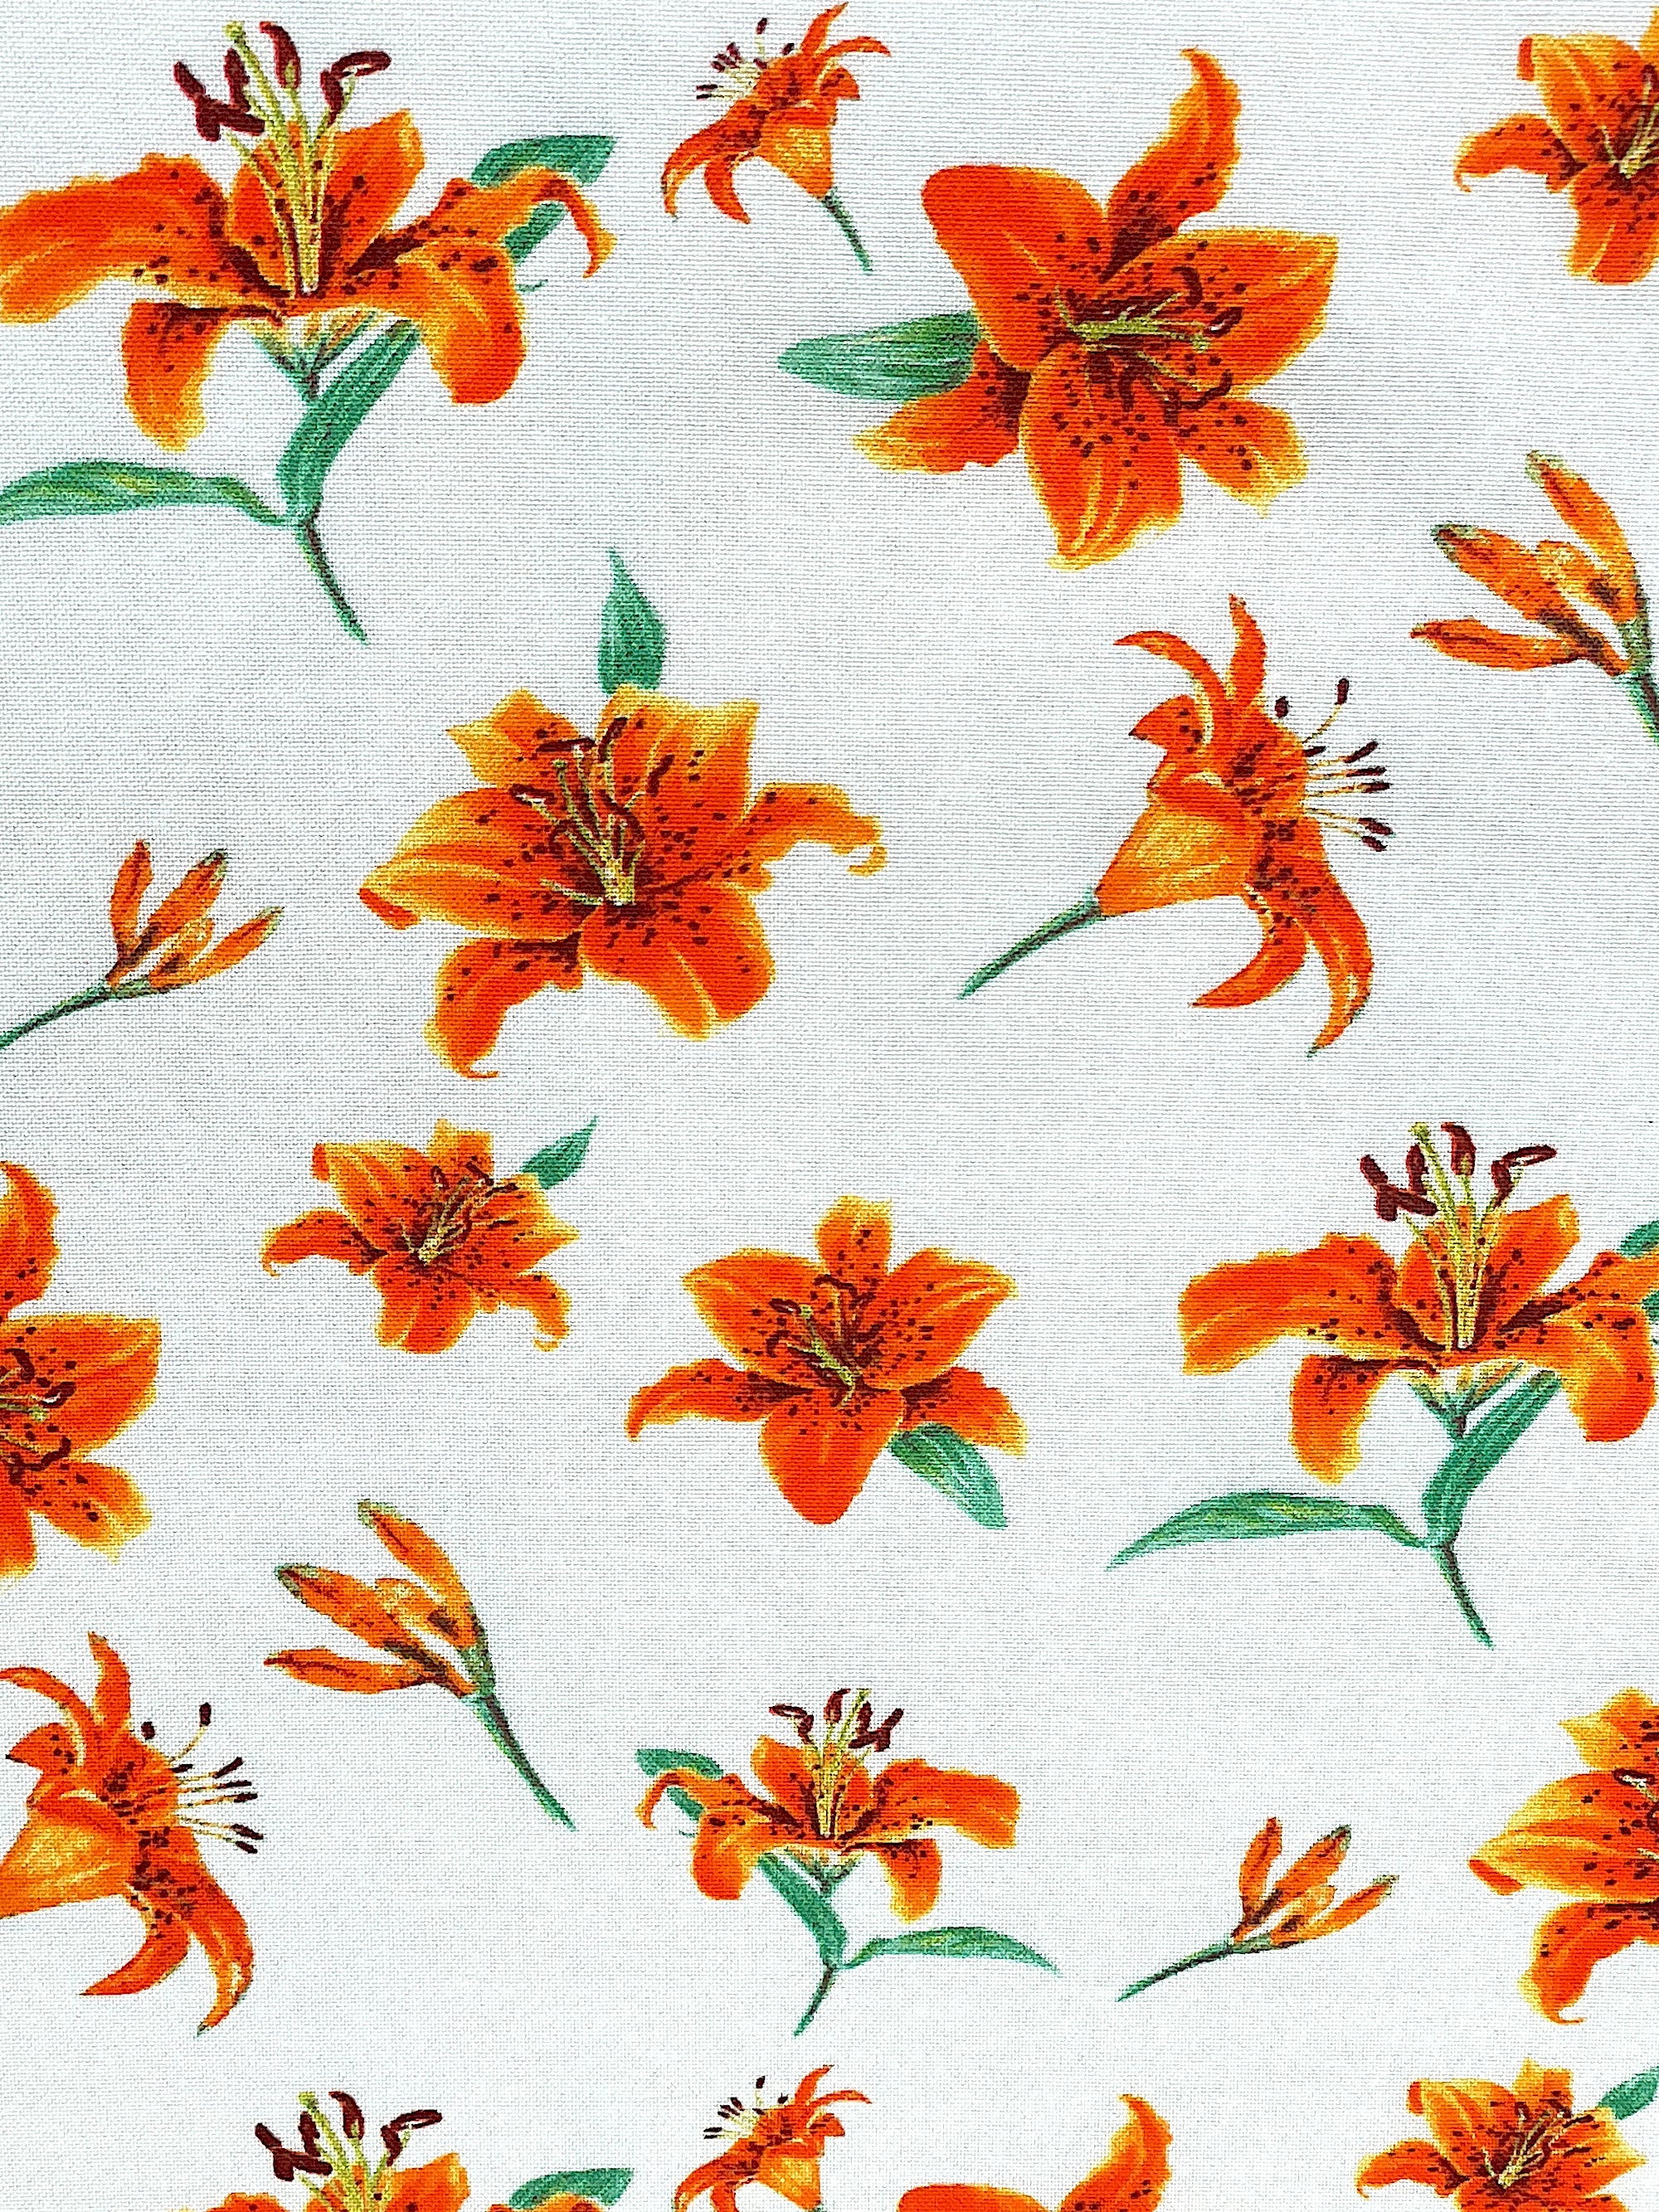 This white cotton fabric is covered with tiger Lilies. This fabric is part of the A Painted Garden Collection by Benartex.